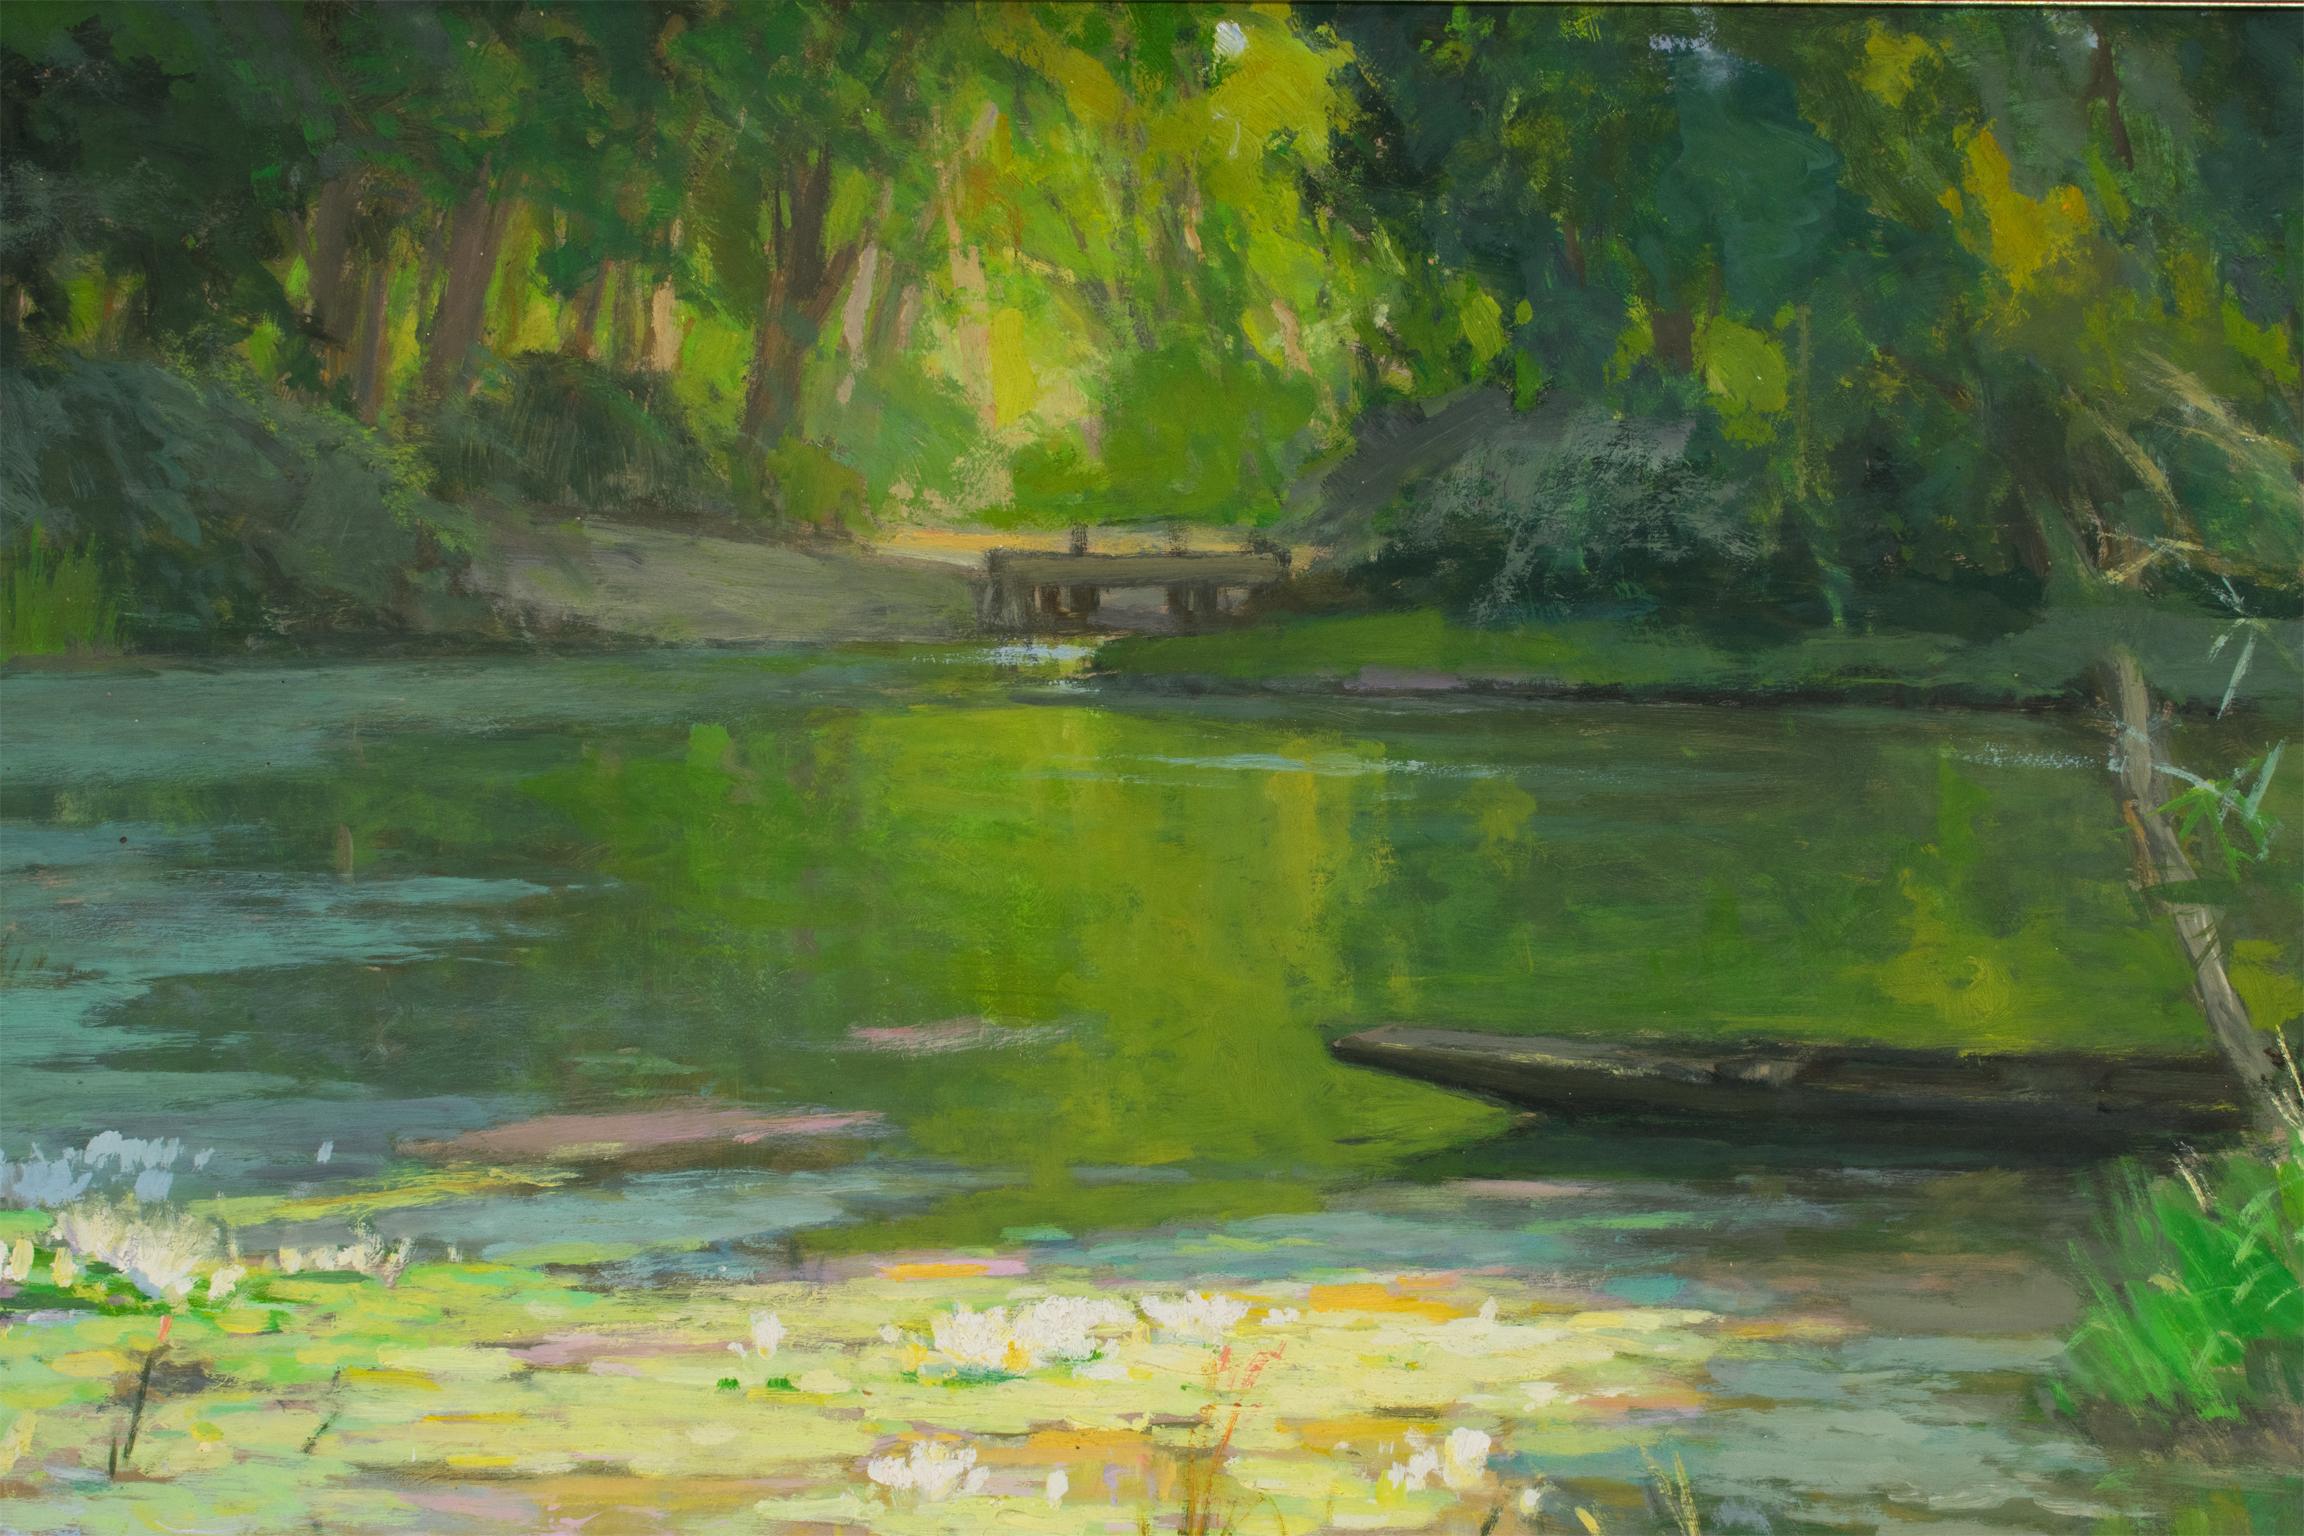 The Water Lilies, Oil on Masonite Board Painting by Pierre Laurent Baeschlin 5